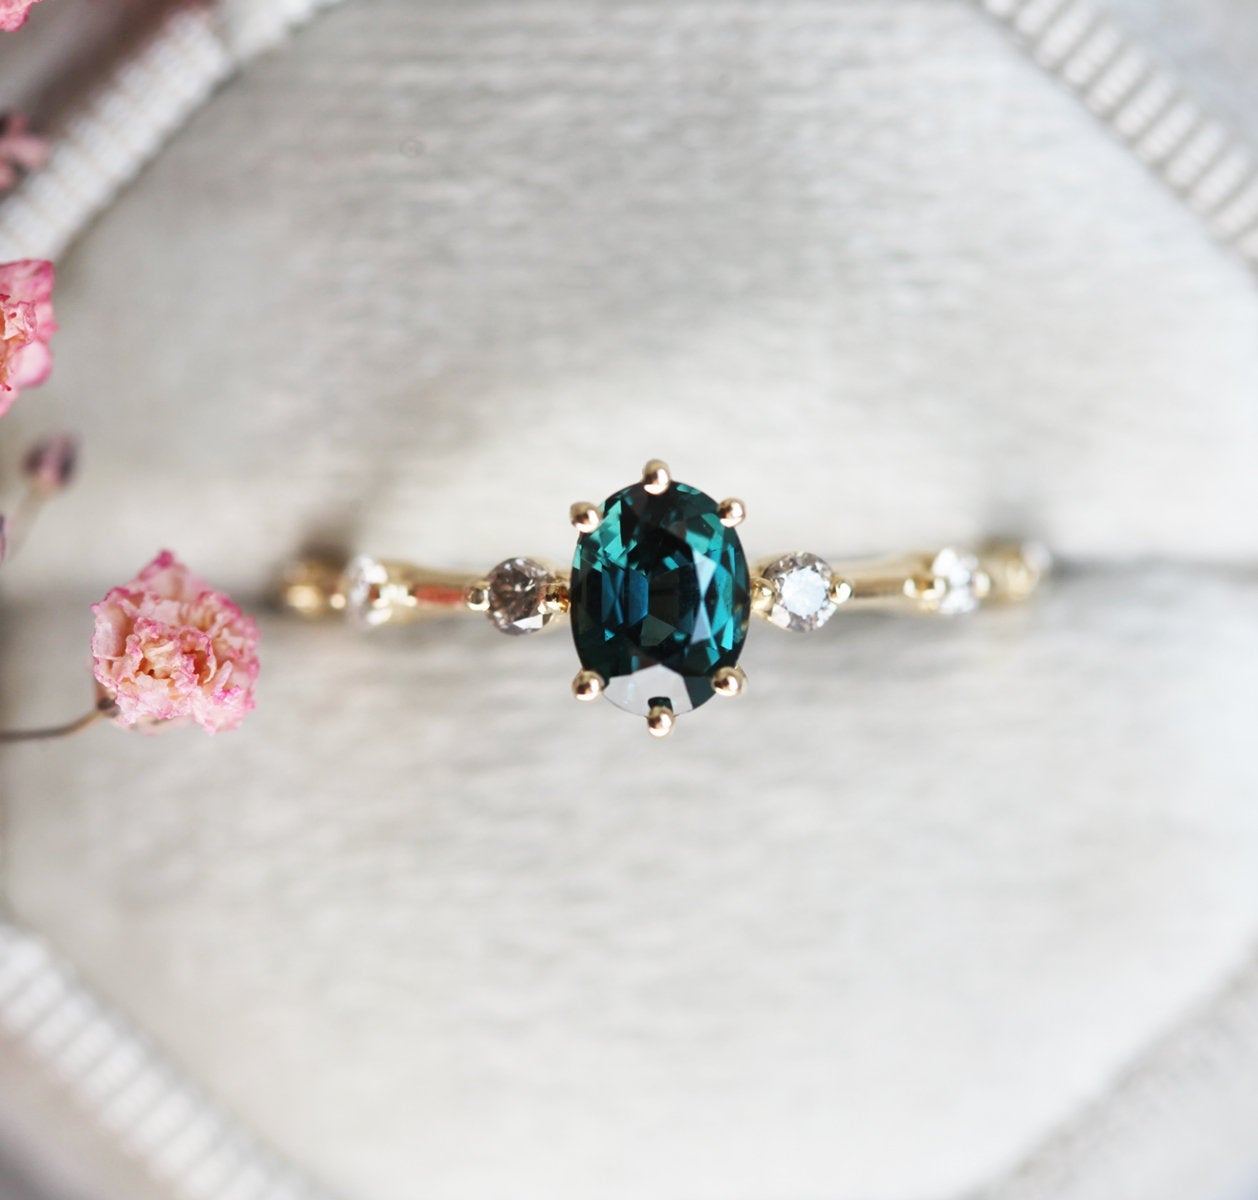 Oval-shaped teal sapphire ring with salt and pepper diamond gemstones